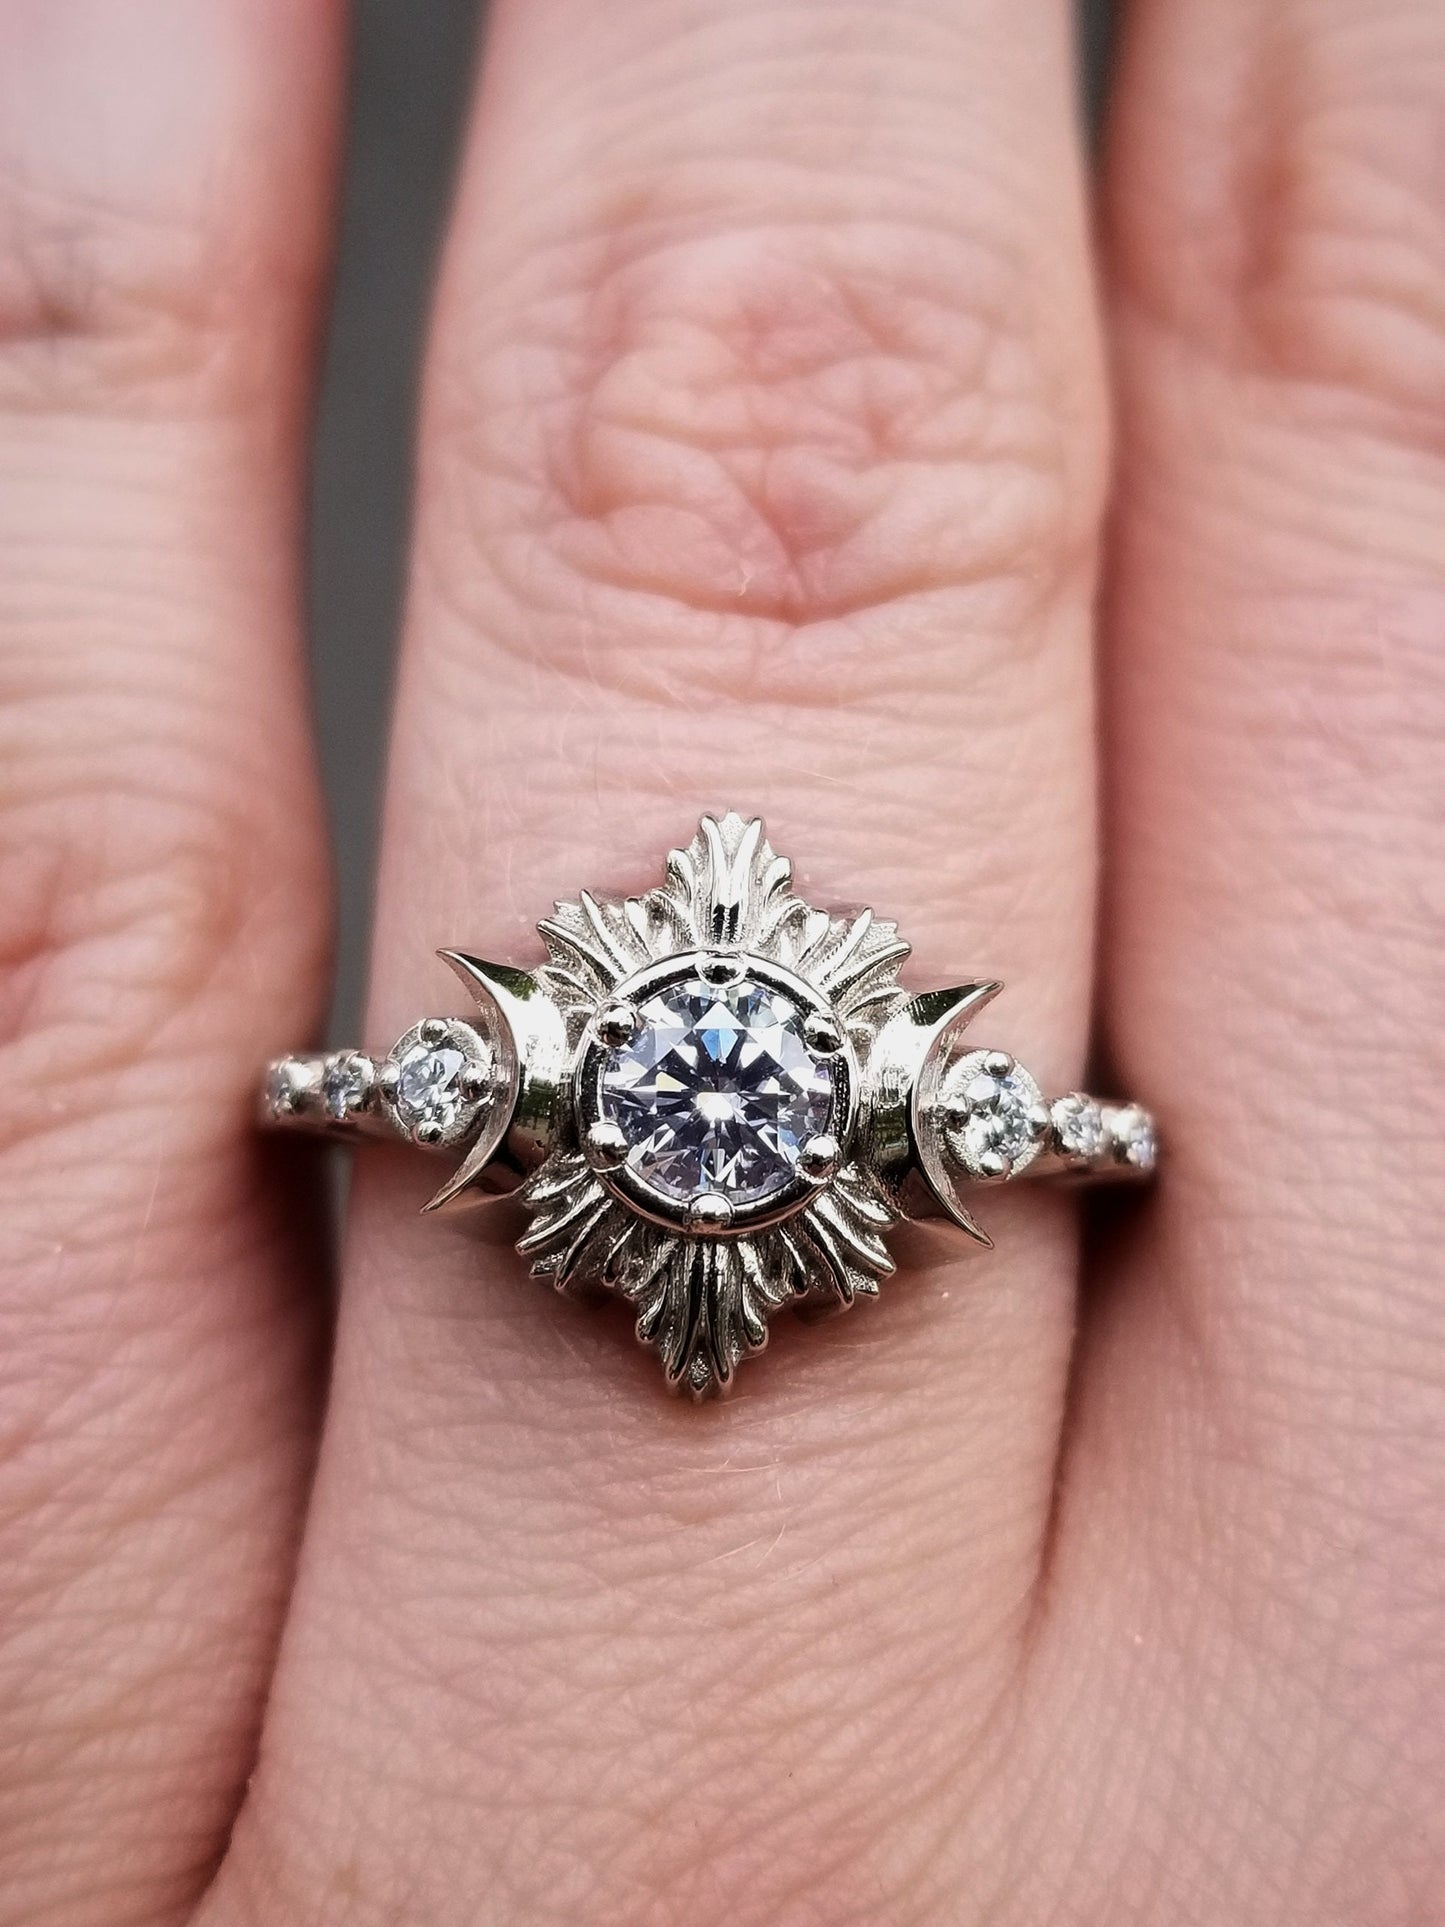 Burning Star and Crescent Moon Engagement Ring - Forever One Moissanite and Diamond Pyre Moon Ring - 14k White, Yellow or Rose Gold